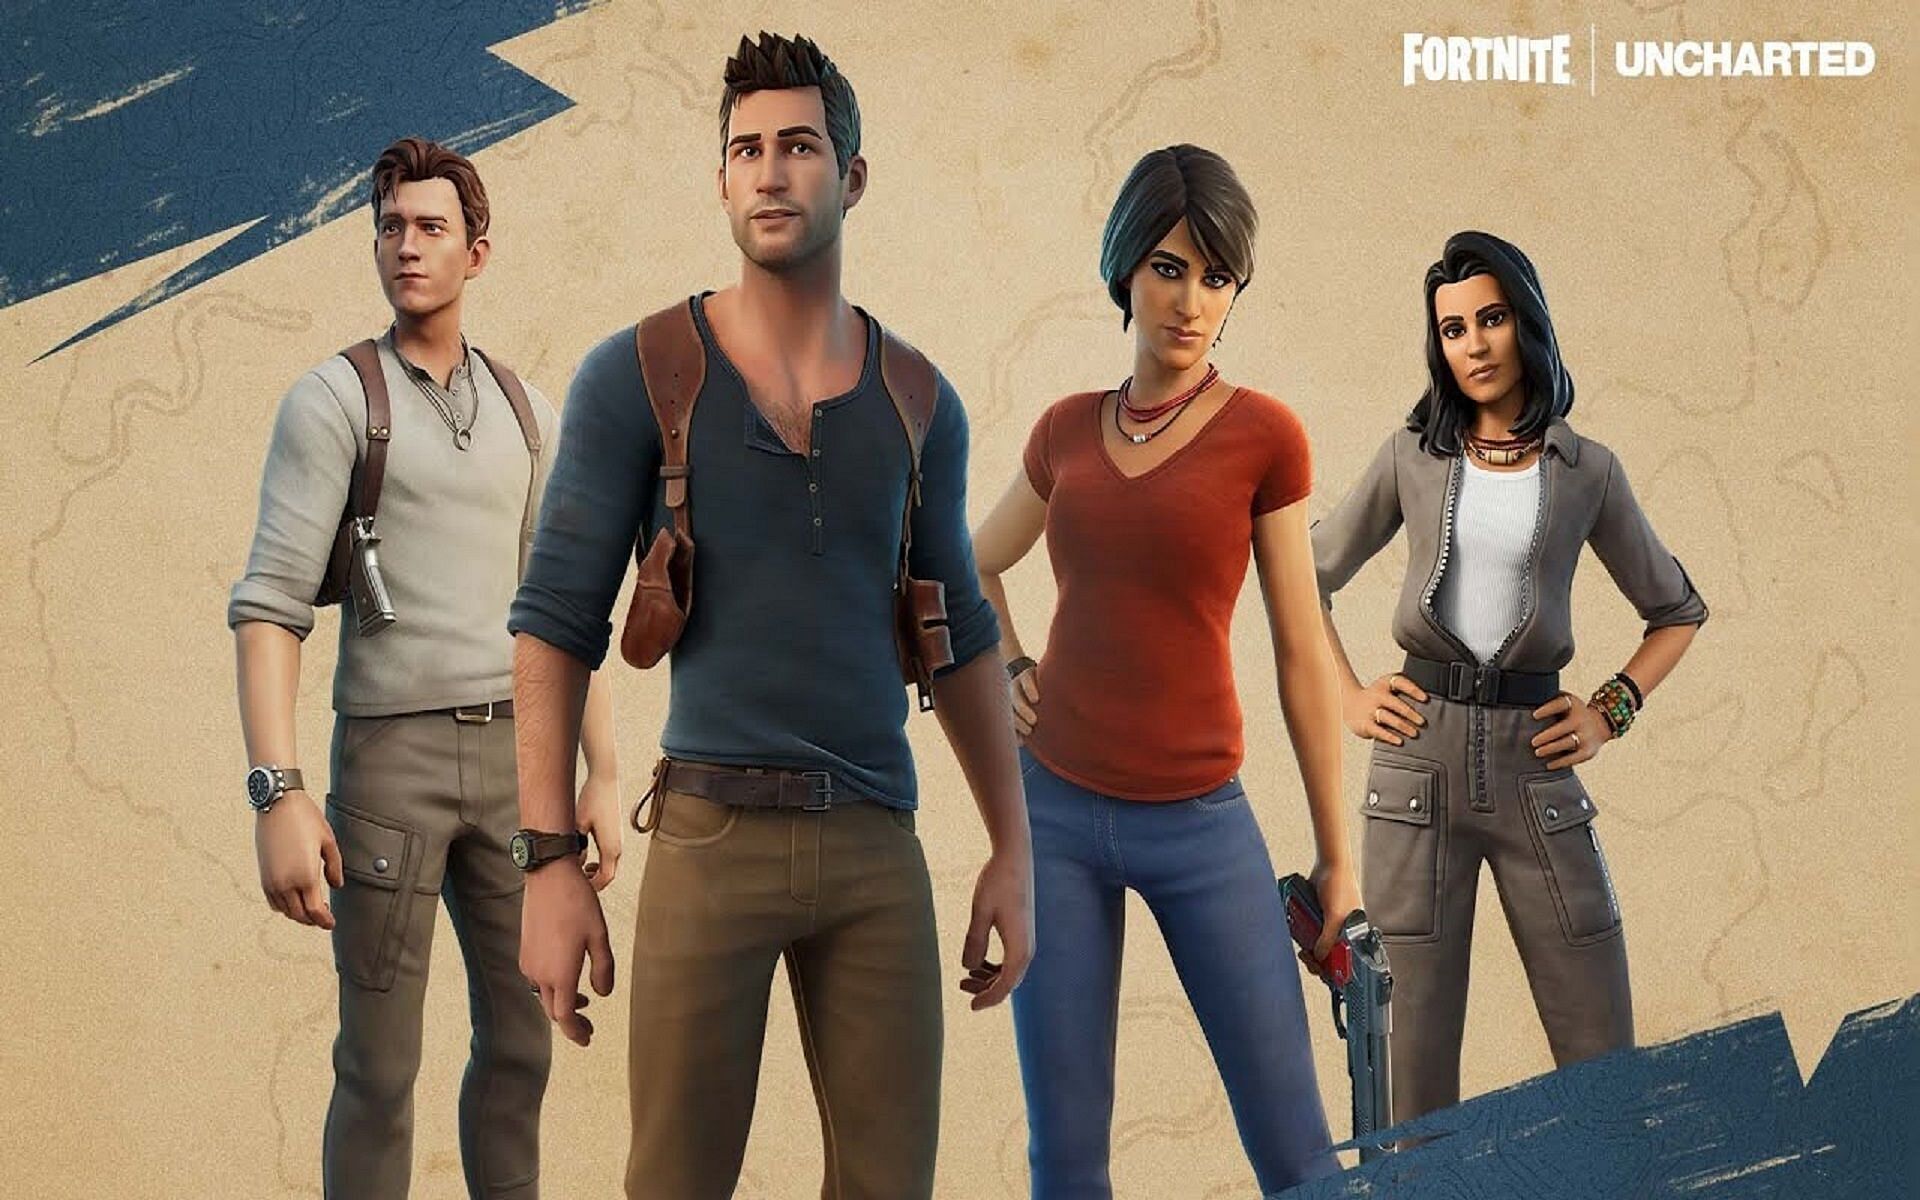 The Fortnite x Uncharted collaboration will occur on February 17 (Image via Epic Games/Fortnite)